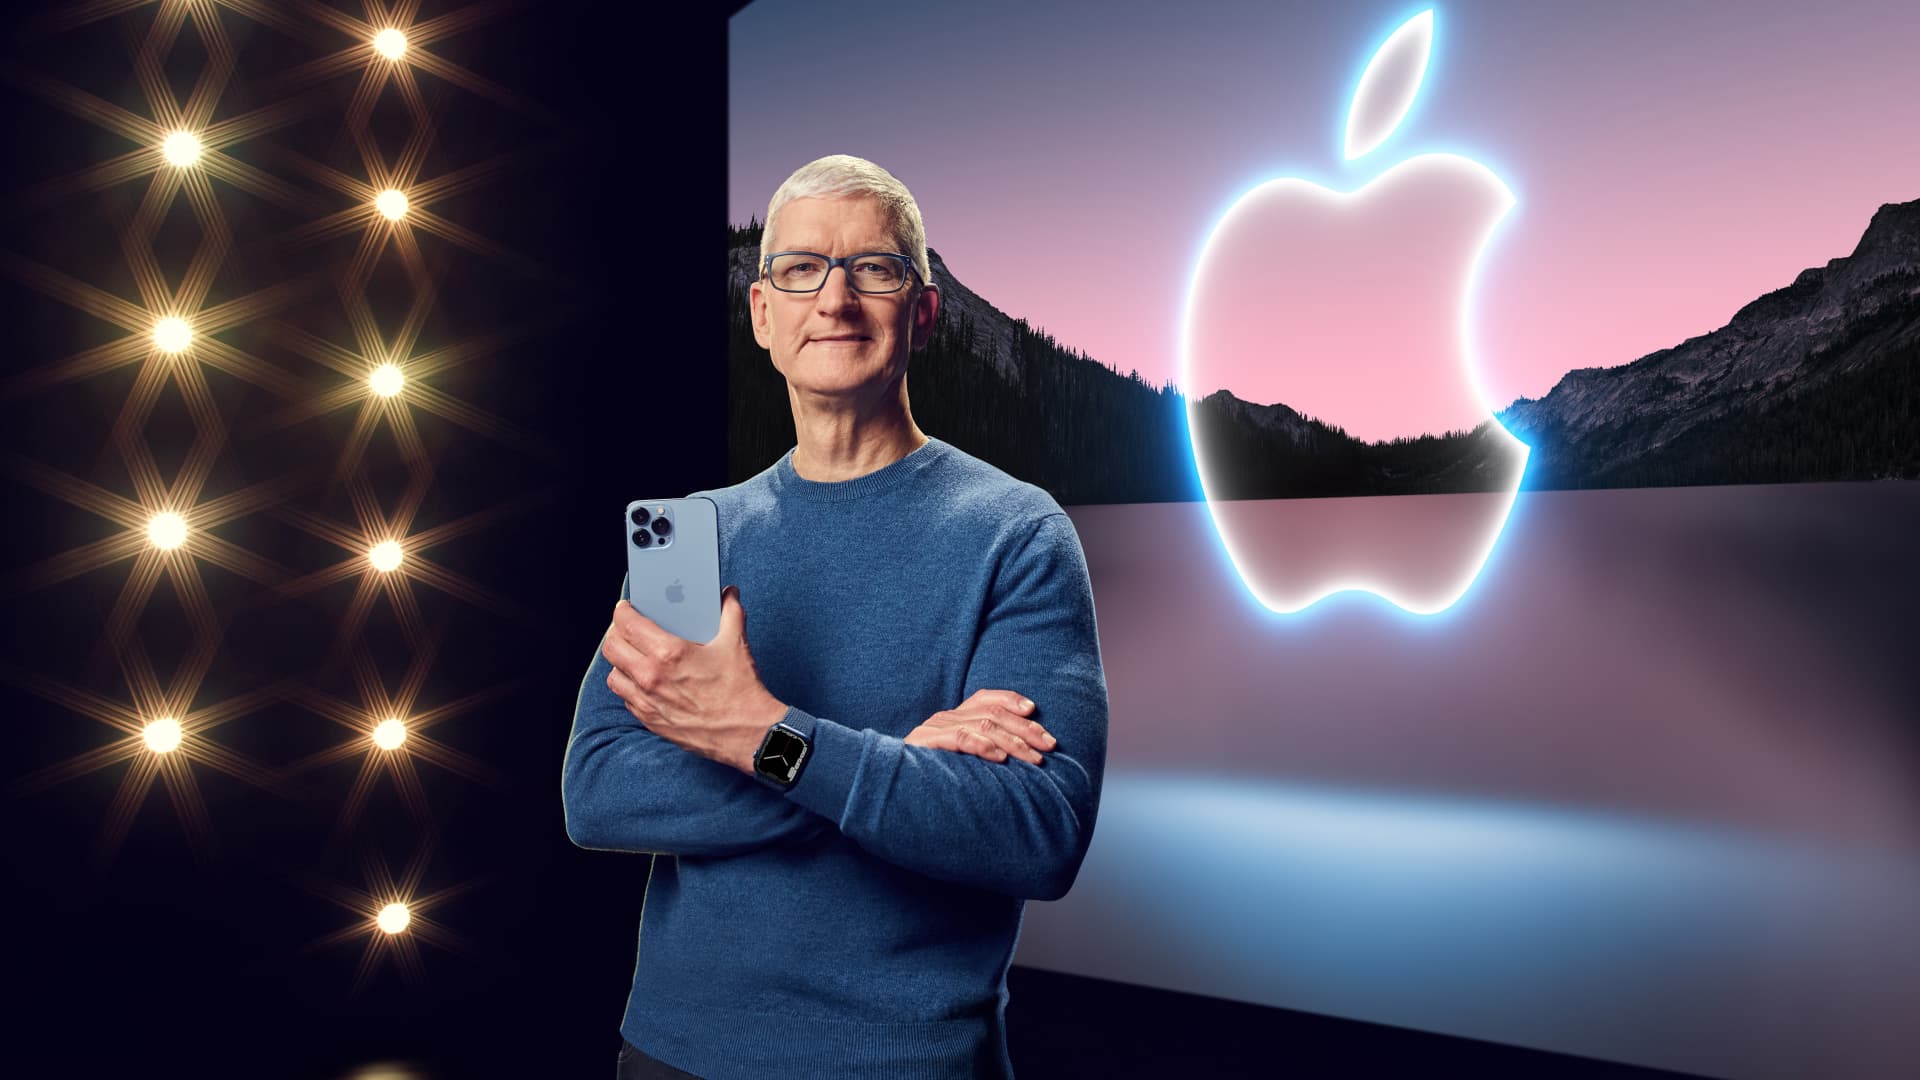 Here are Tuesday’s biggest analyst calls: Apple, Disney, Target, AMD, Tesla, Coinbase, Amazon & more